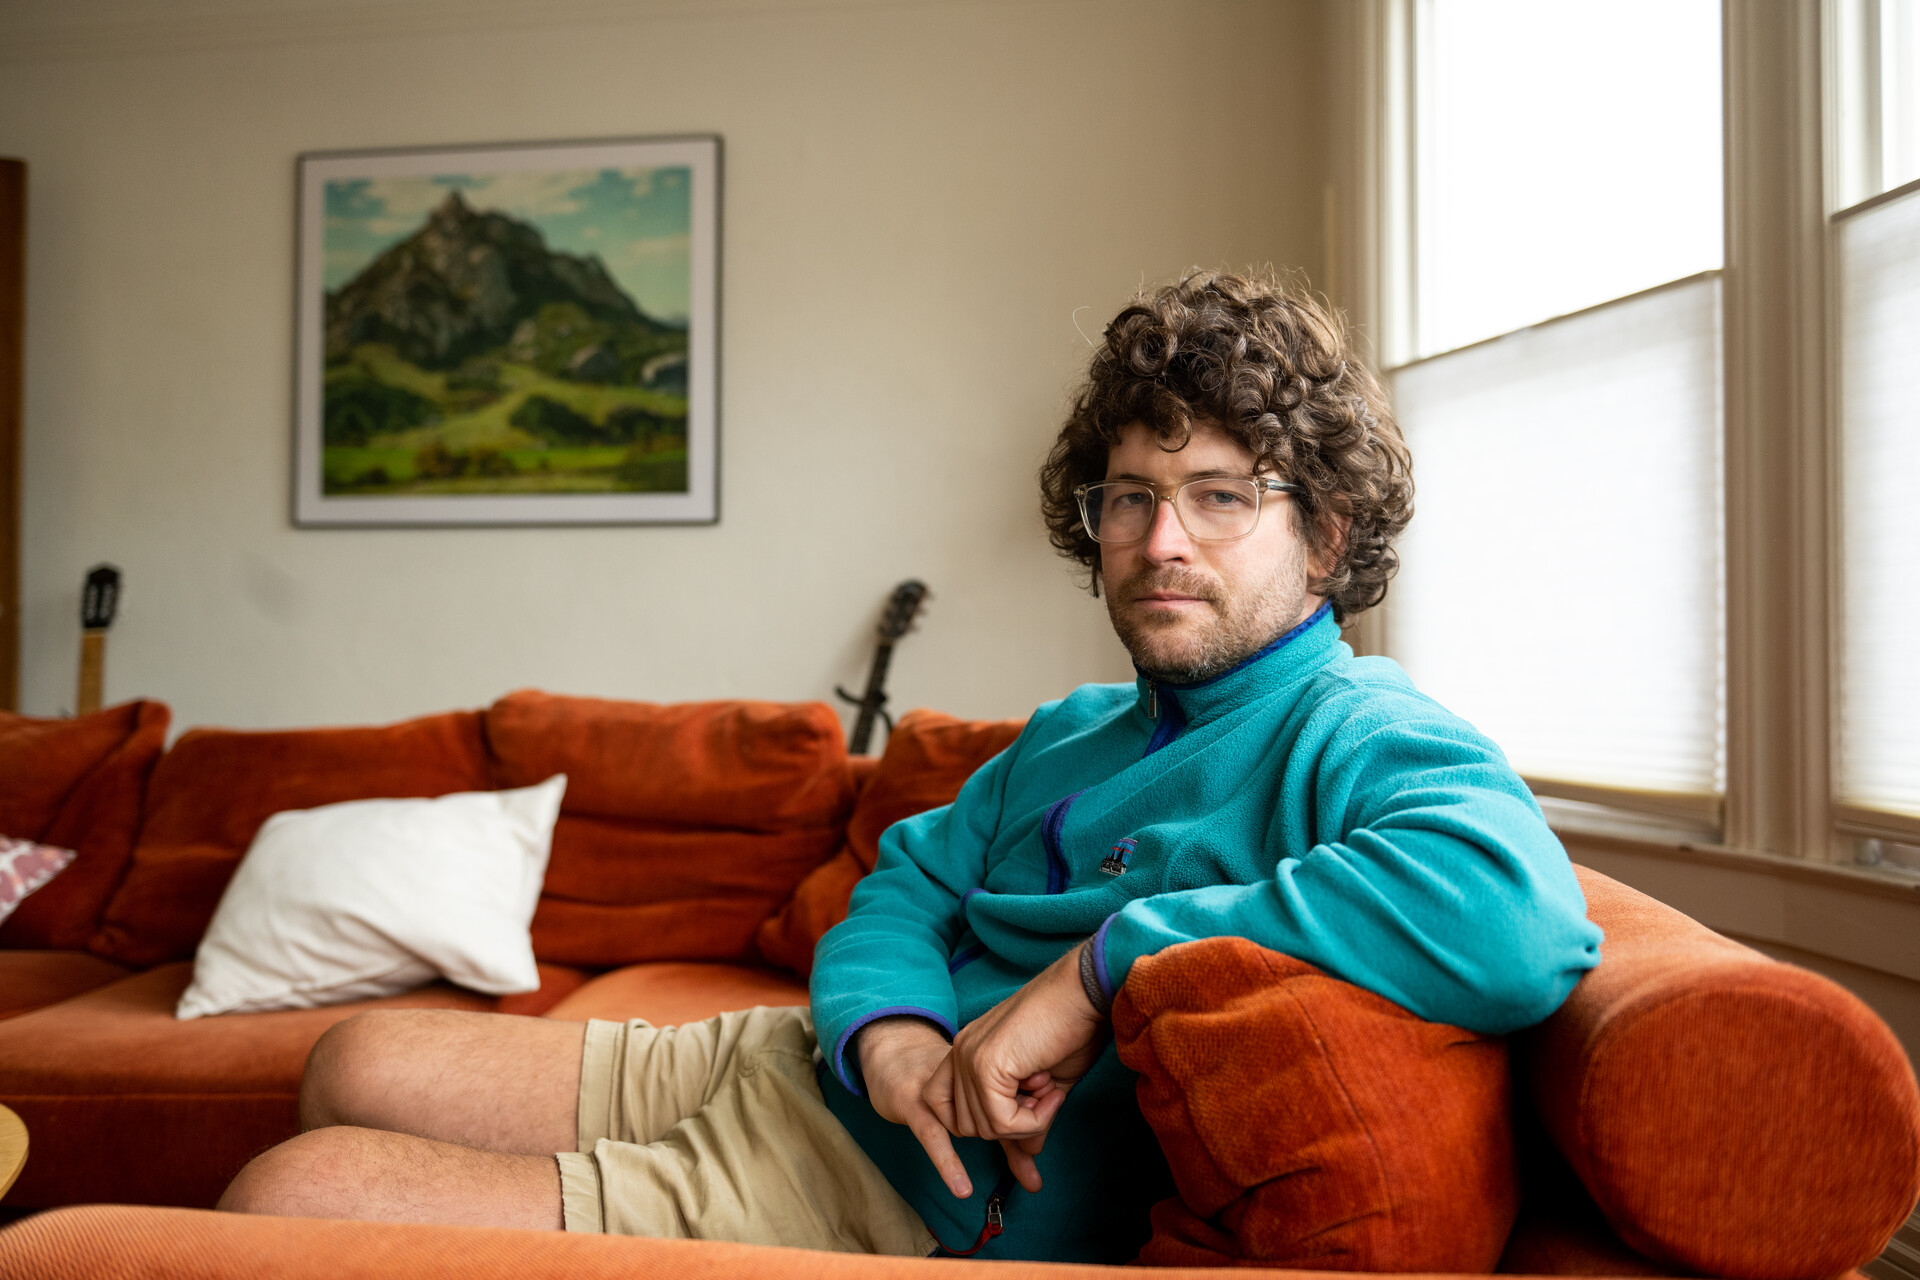 A white man with curly light brown hair and eye glasses sits on a couch with feet up and looks at the camera with head turned to the side.